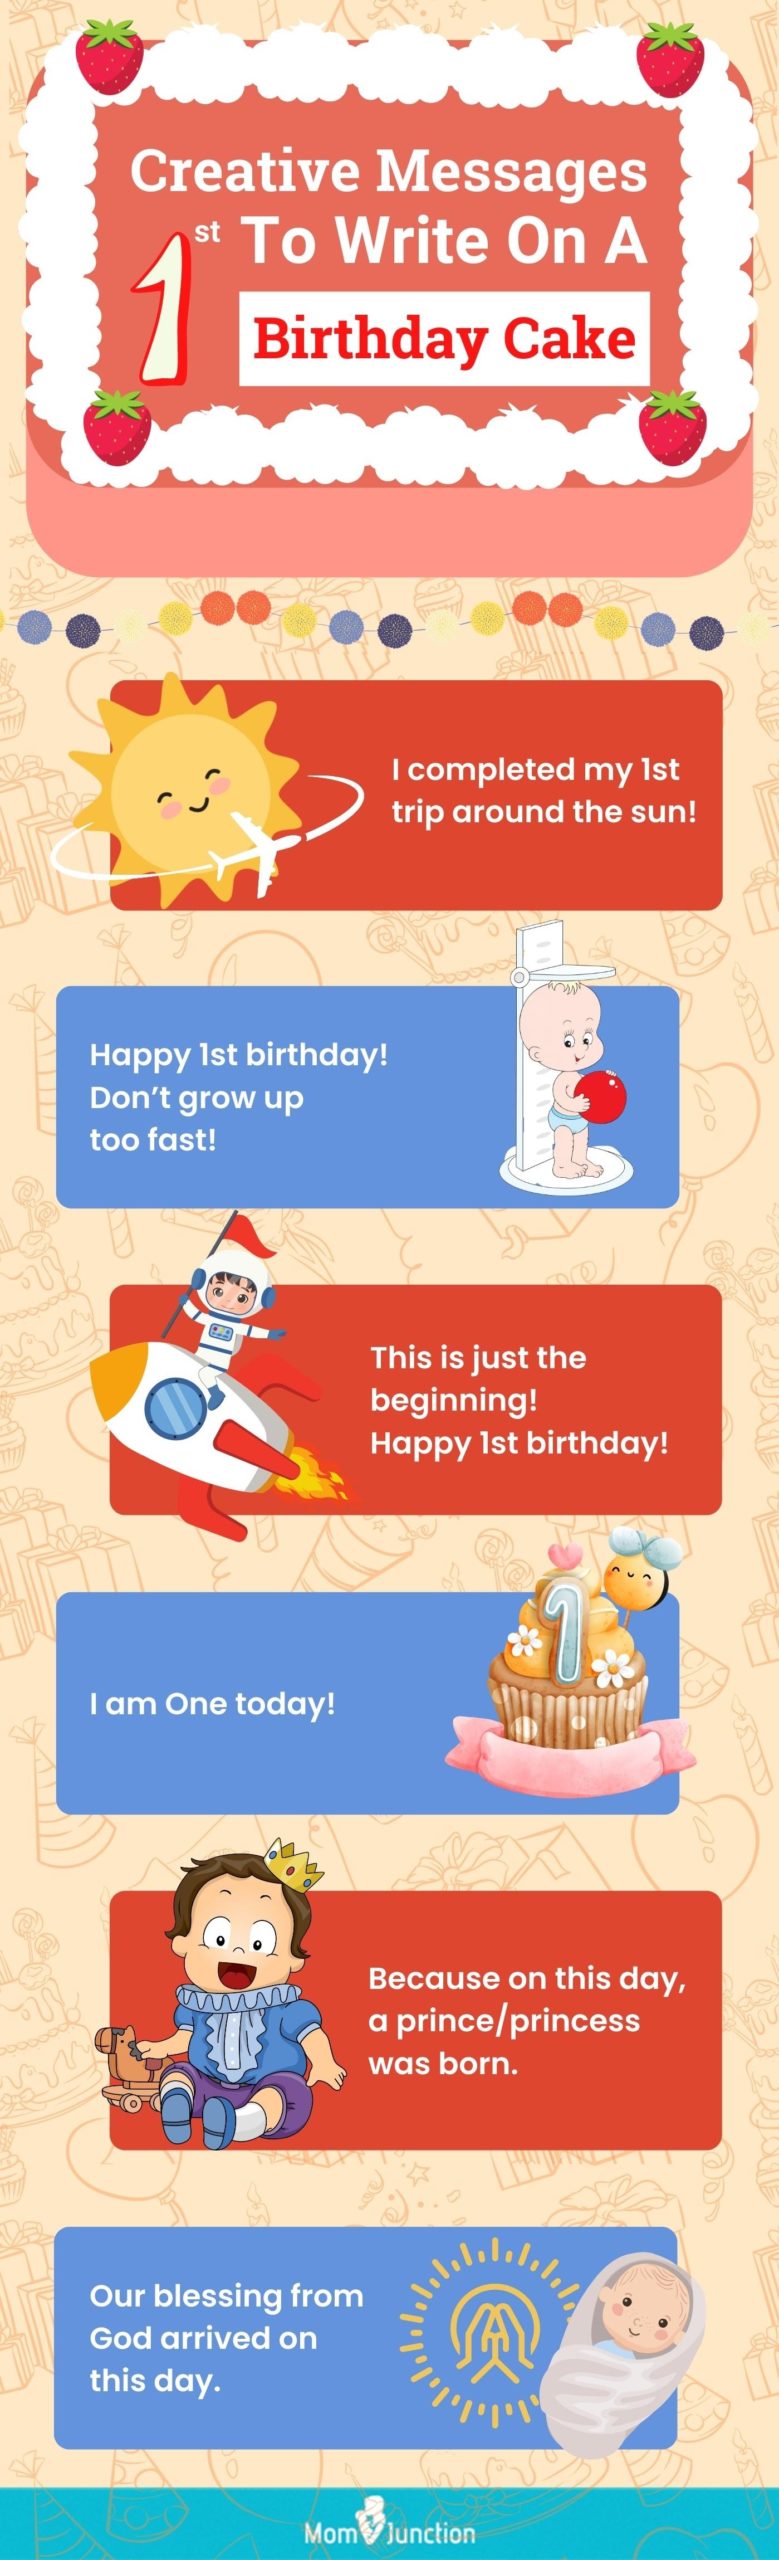 unique and funny message on first birthday (infographic)